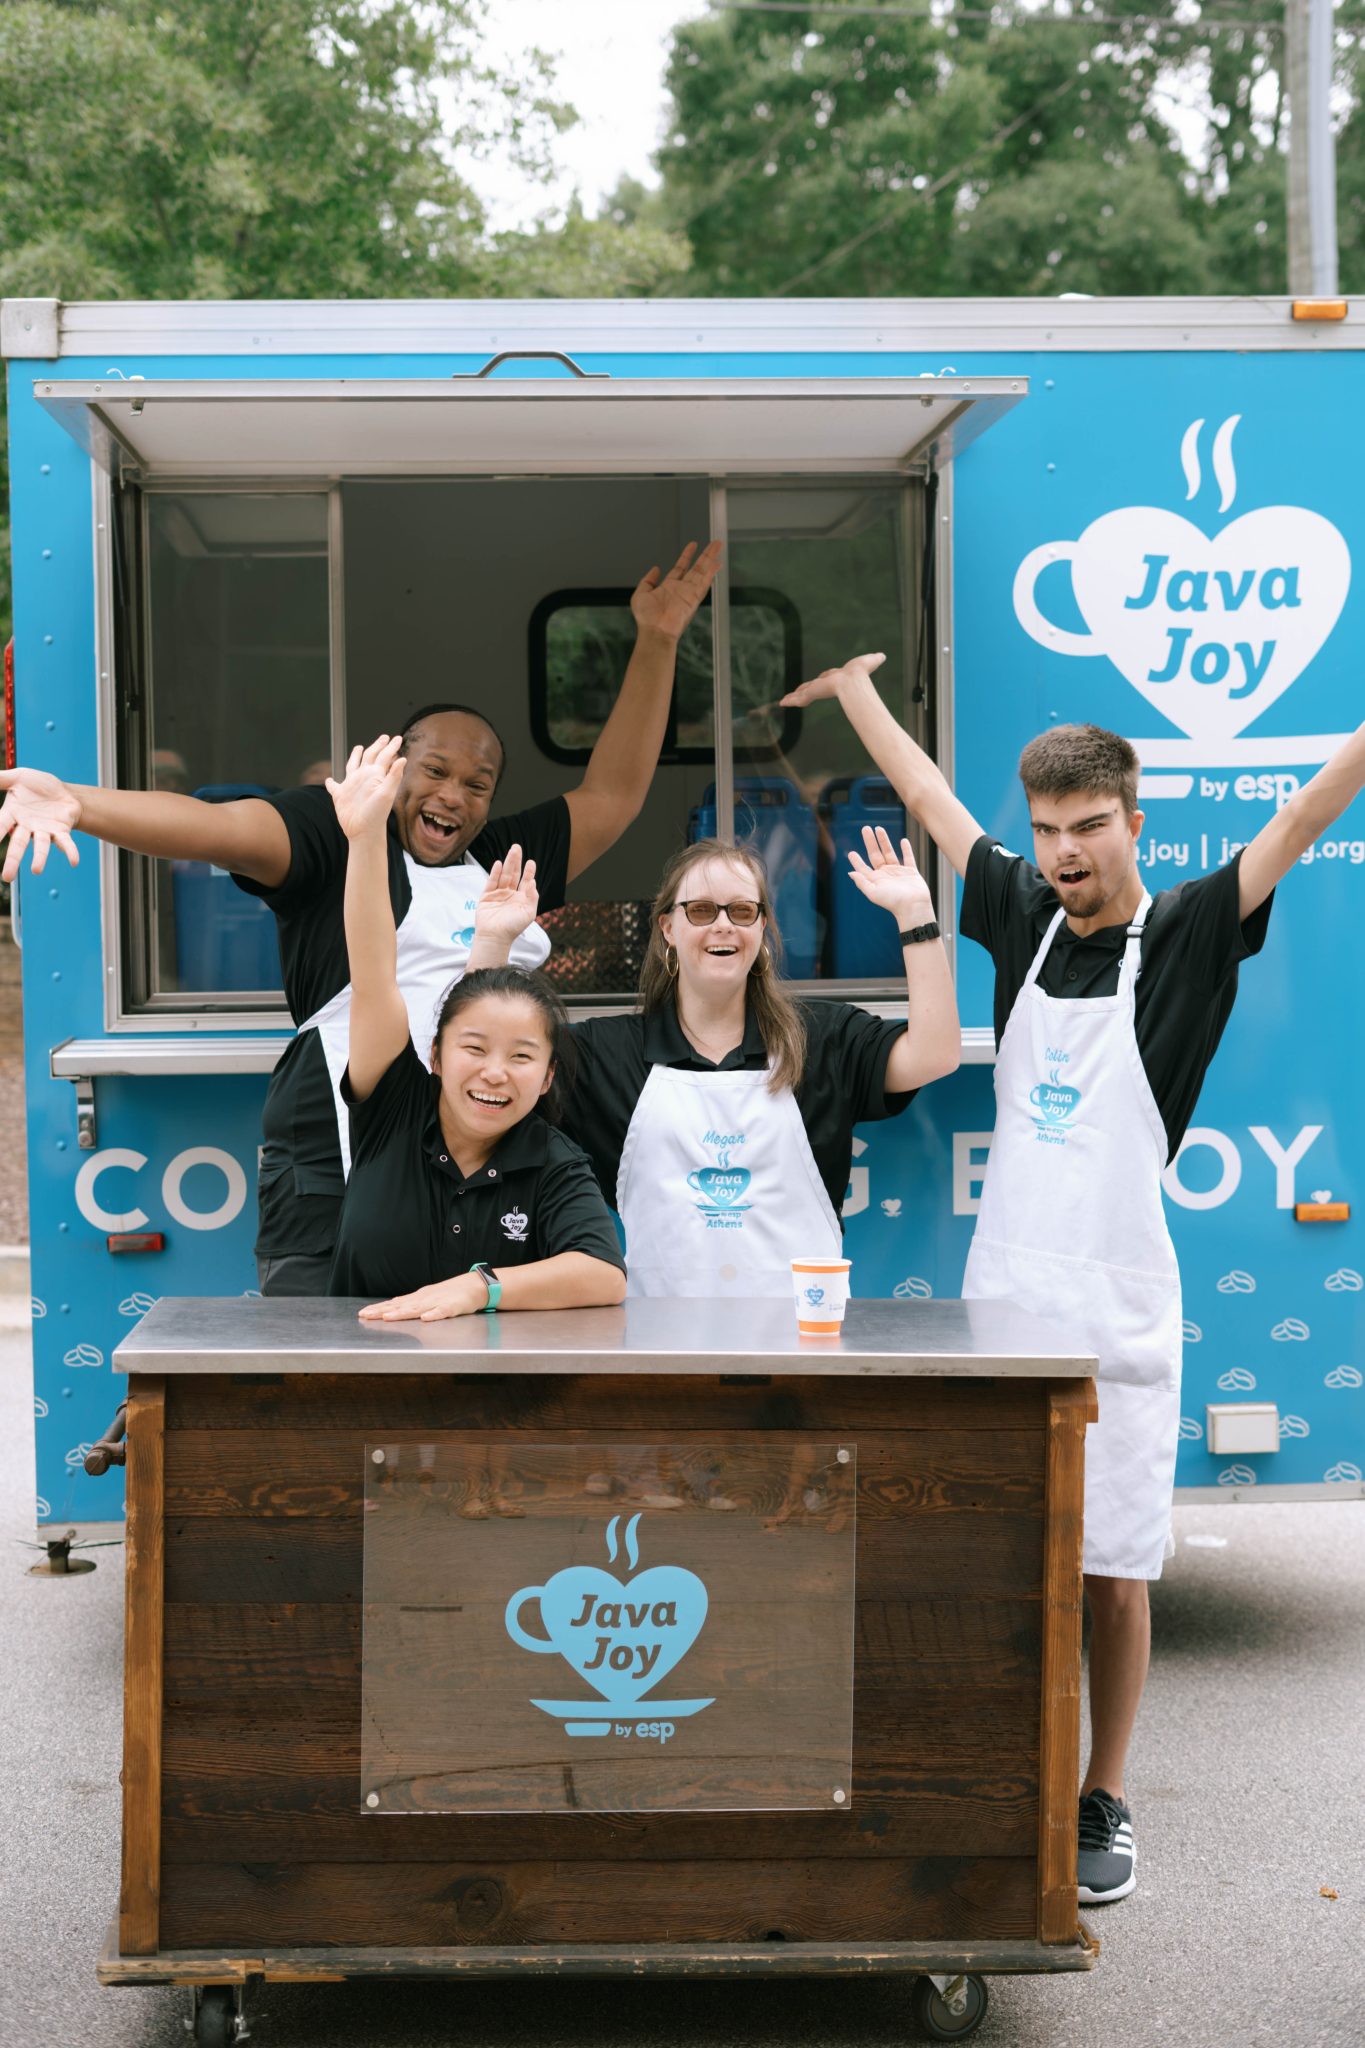 a group of people standing in front of a food truck with Java Joy sign